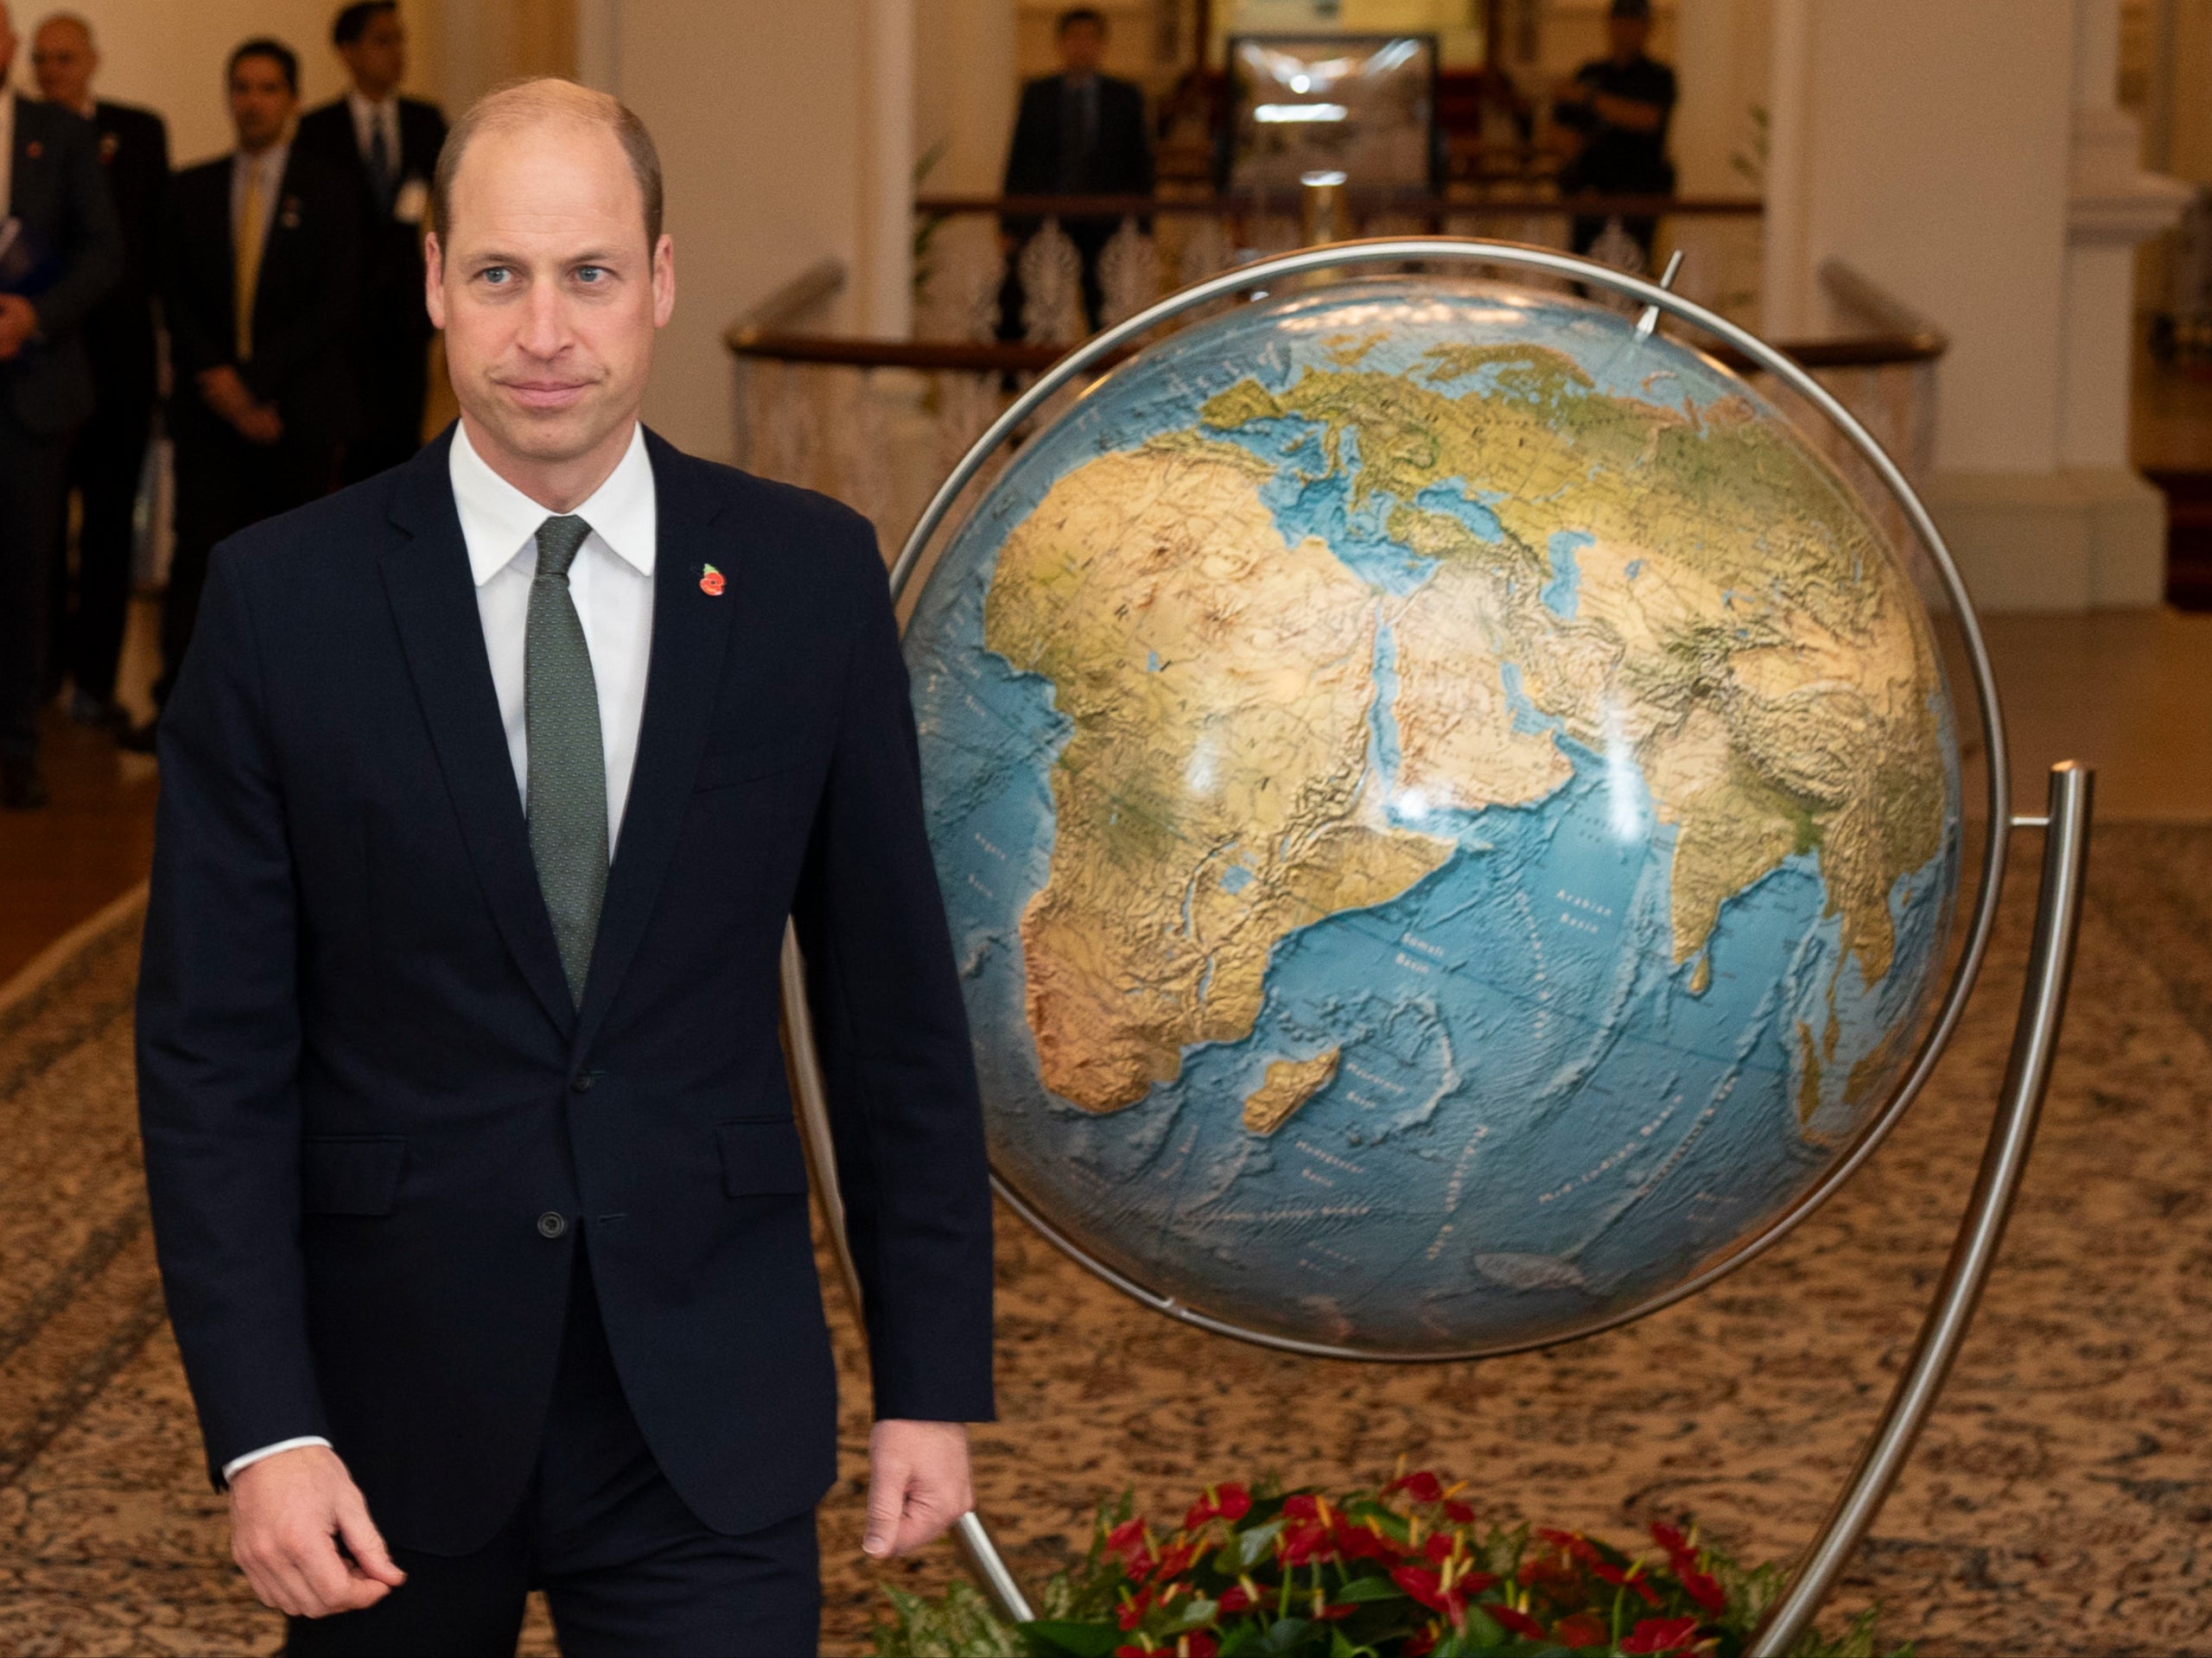 prince william, prince of wales, prince william says he wants to go ‘a step further’ than his family by bringing change